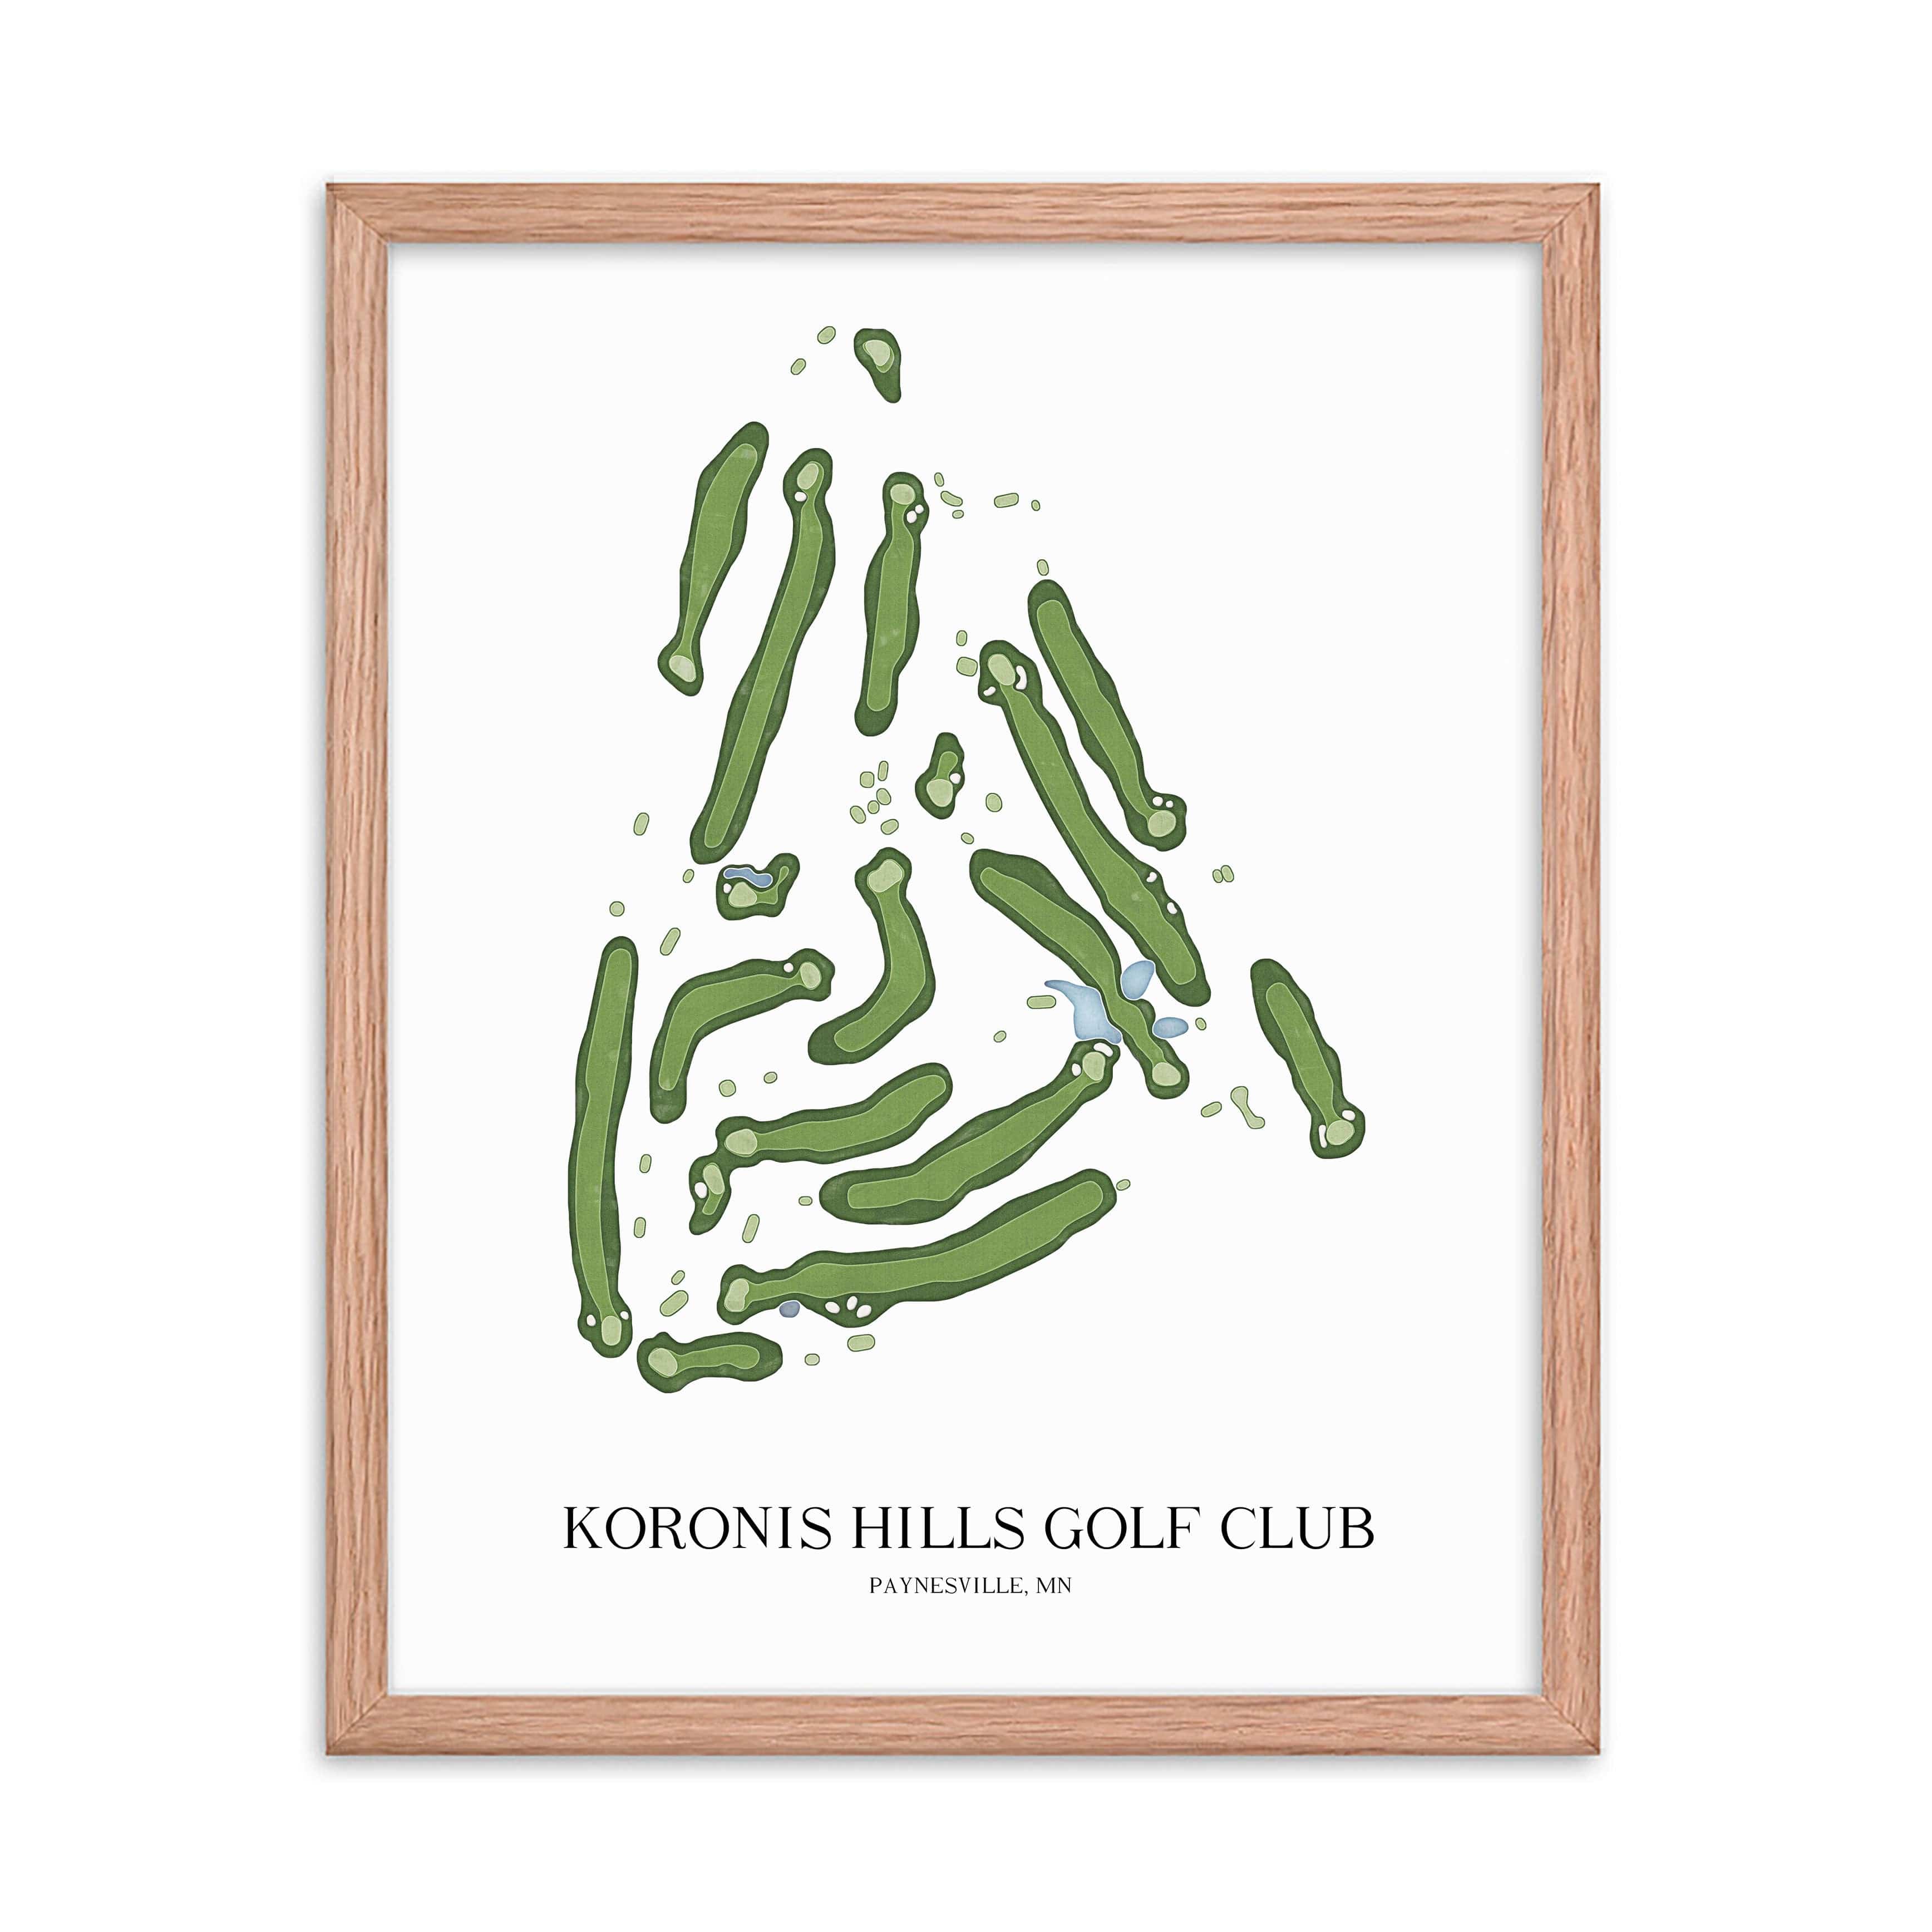 The 19th Hole Golf Shop - Golf Course Prints -  Koronis Hills Golf Club Golf Course Map